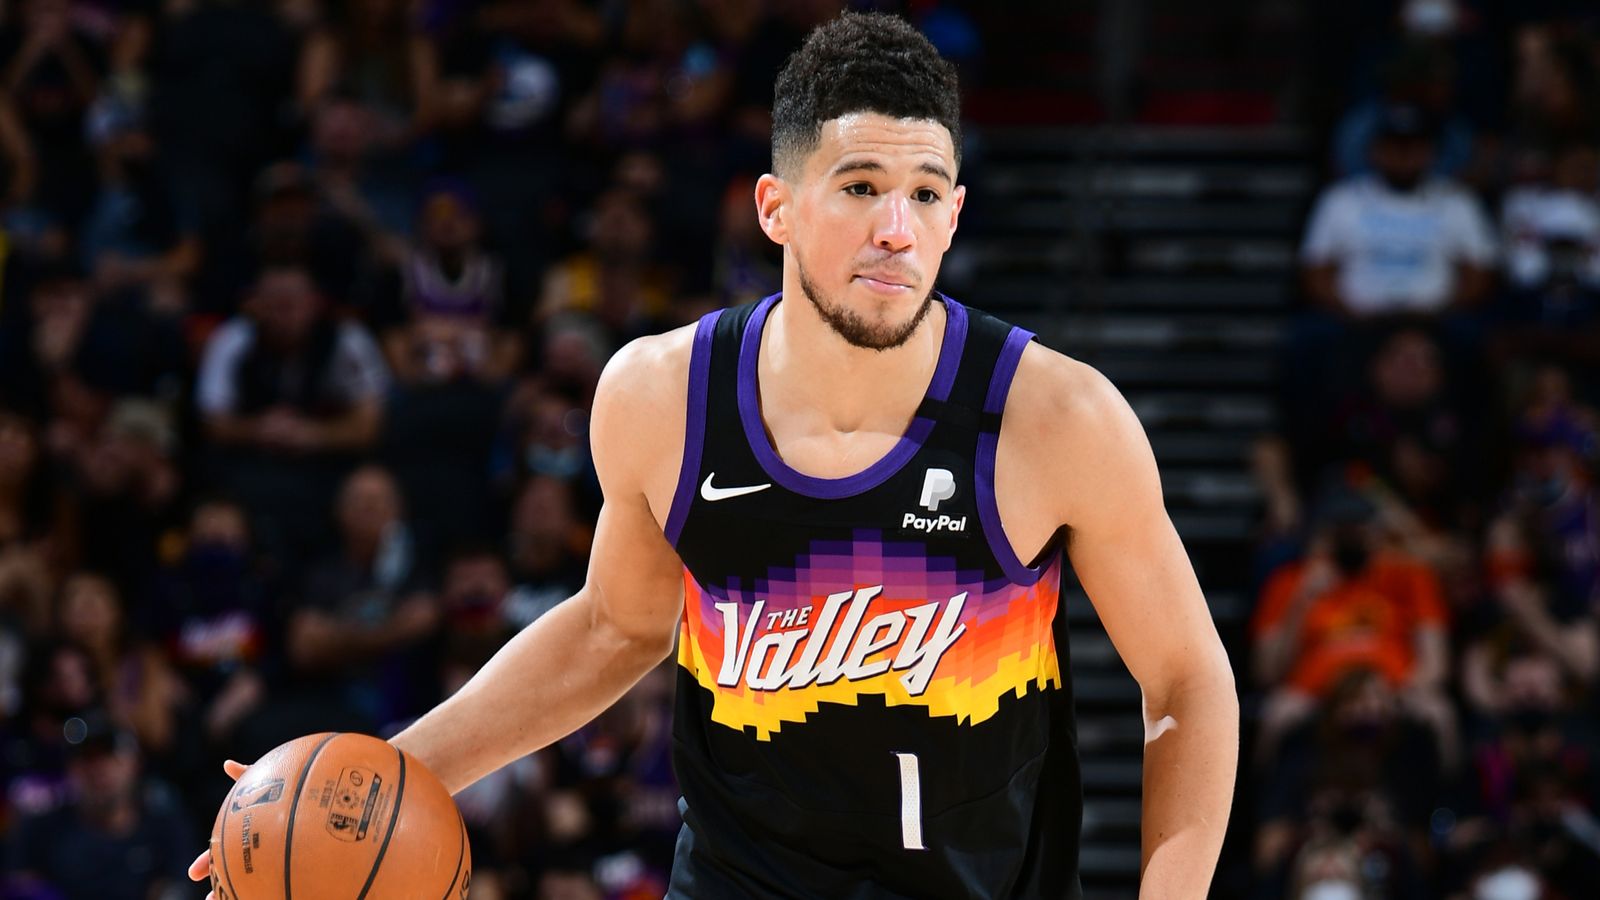 The jersey of Devin Booker of the Phoenix Suns during the game